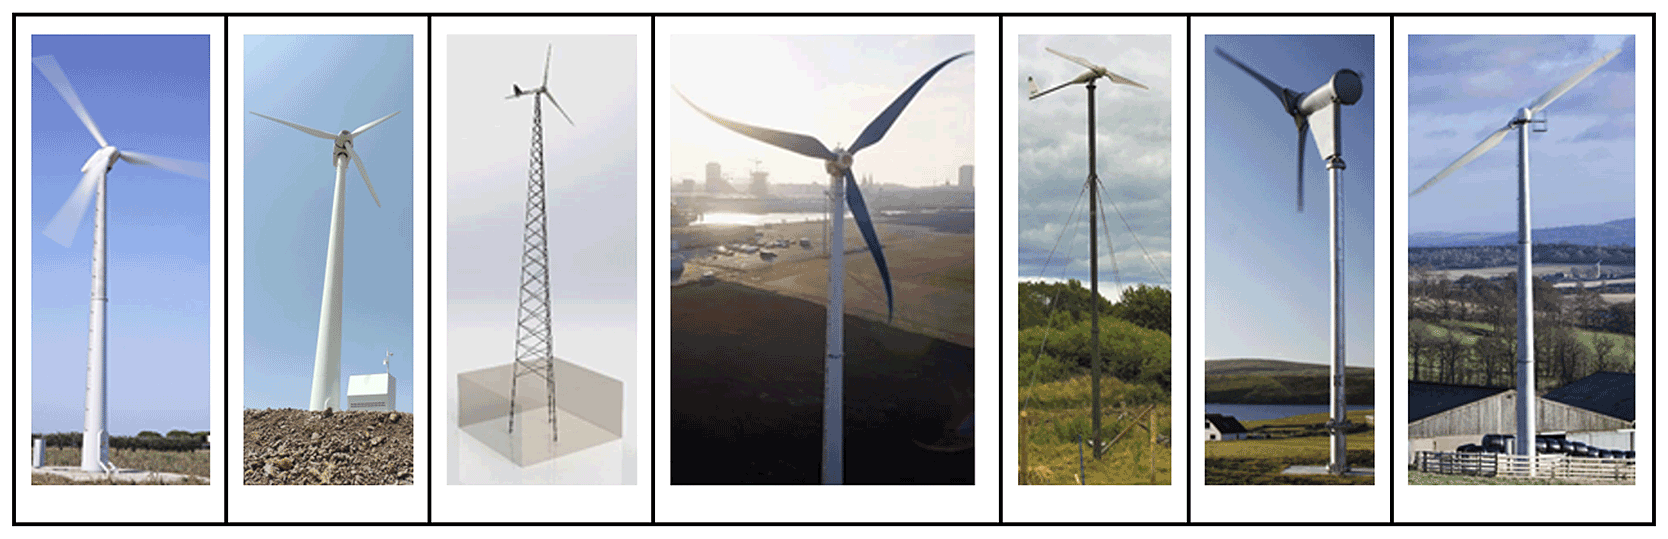 Concrete laminar wind turbine foundations: doing more with less